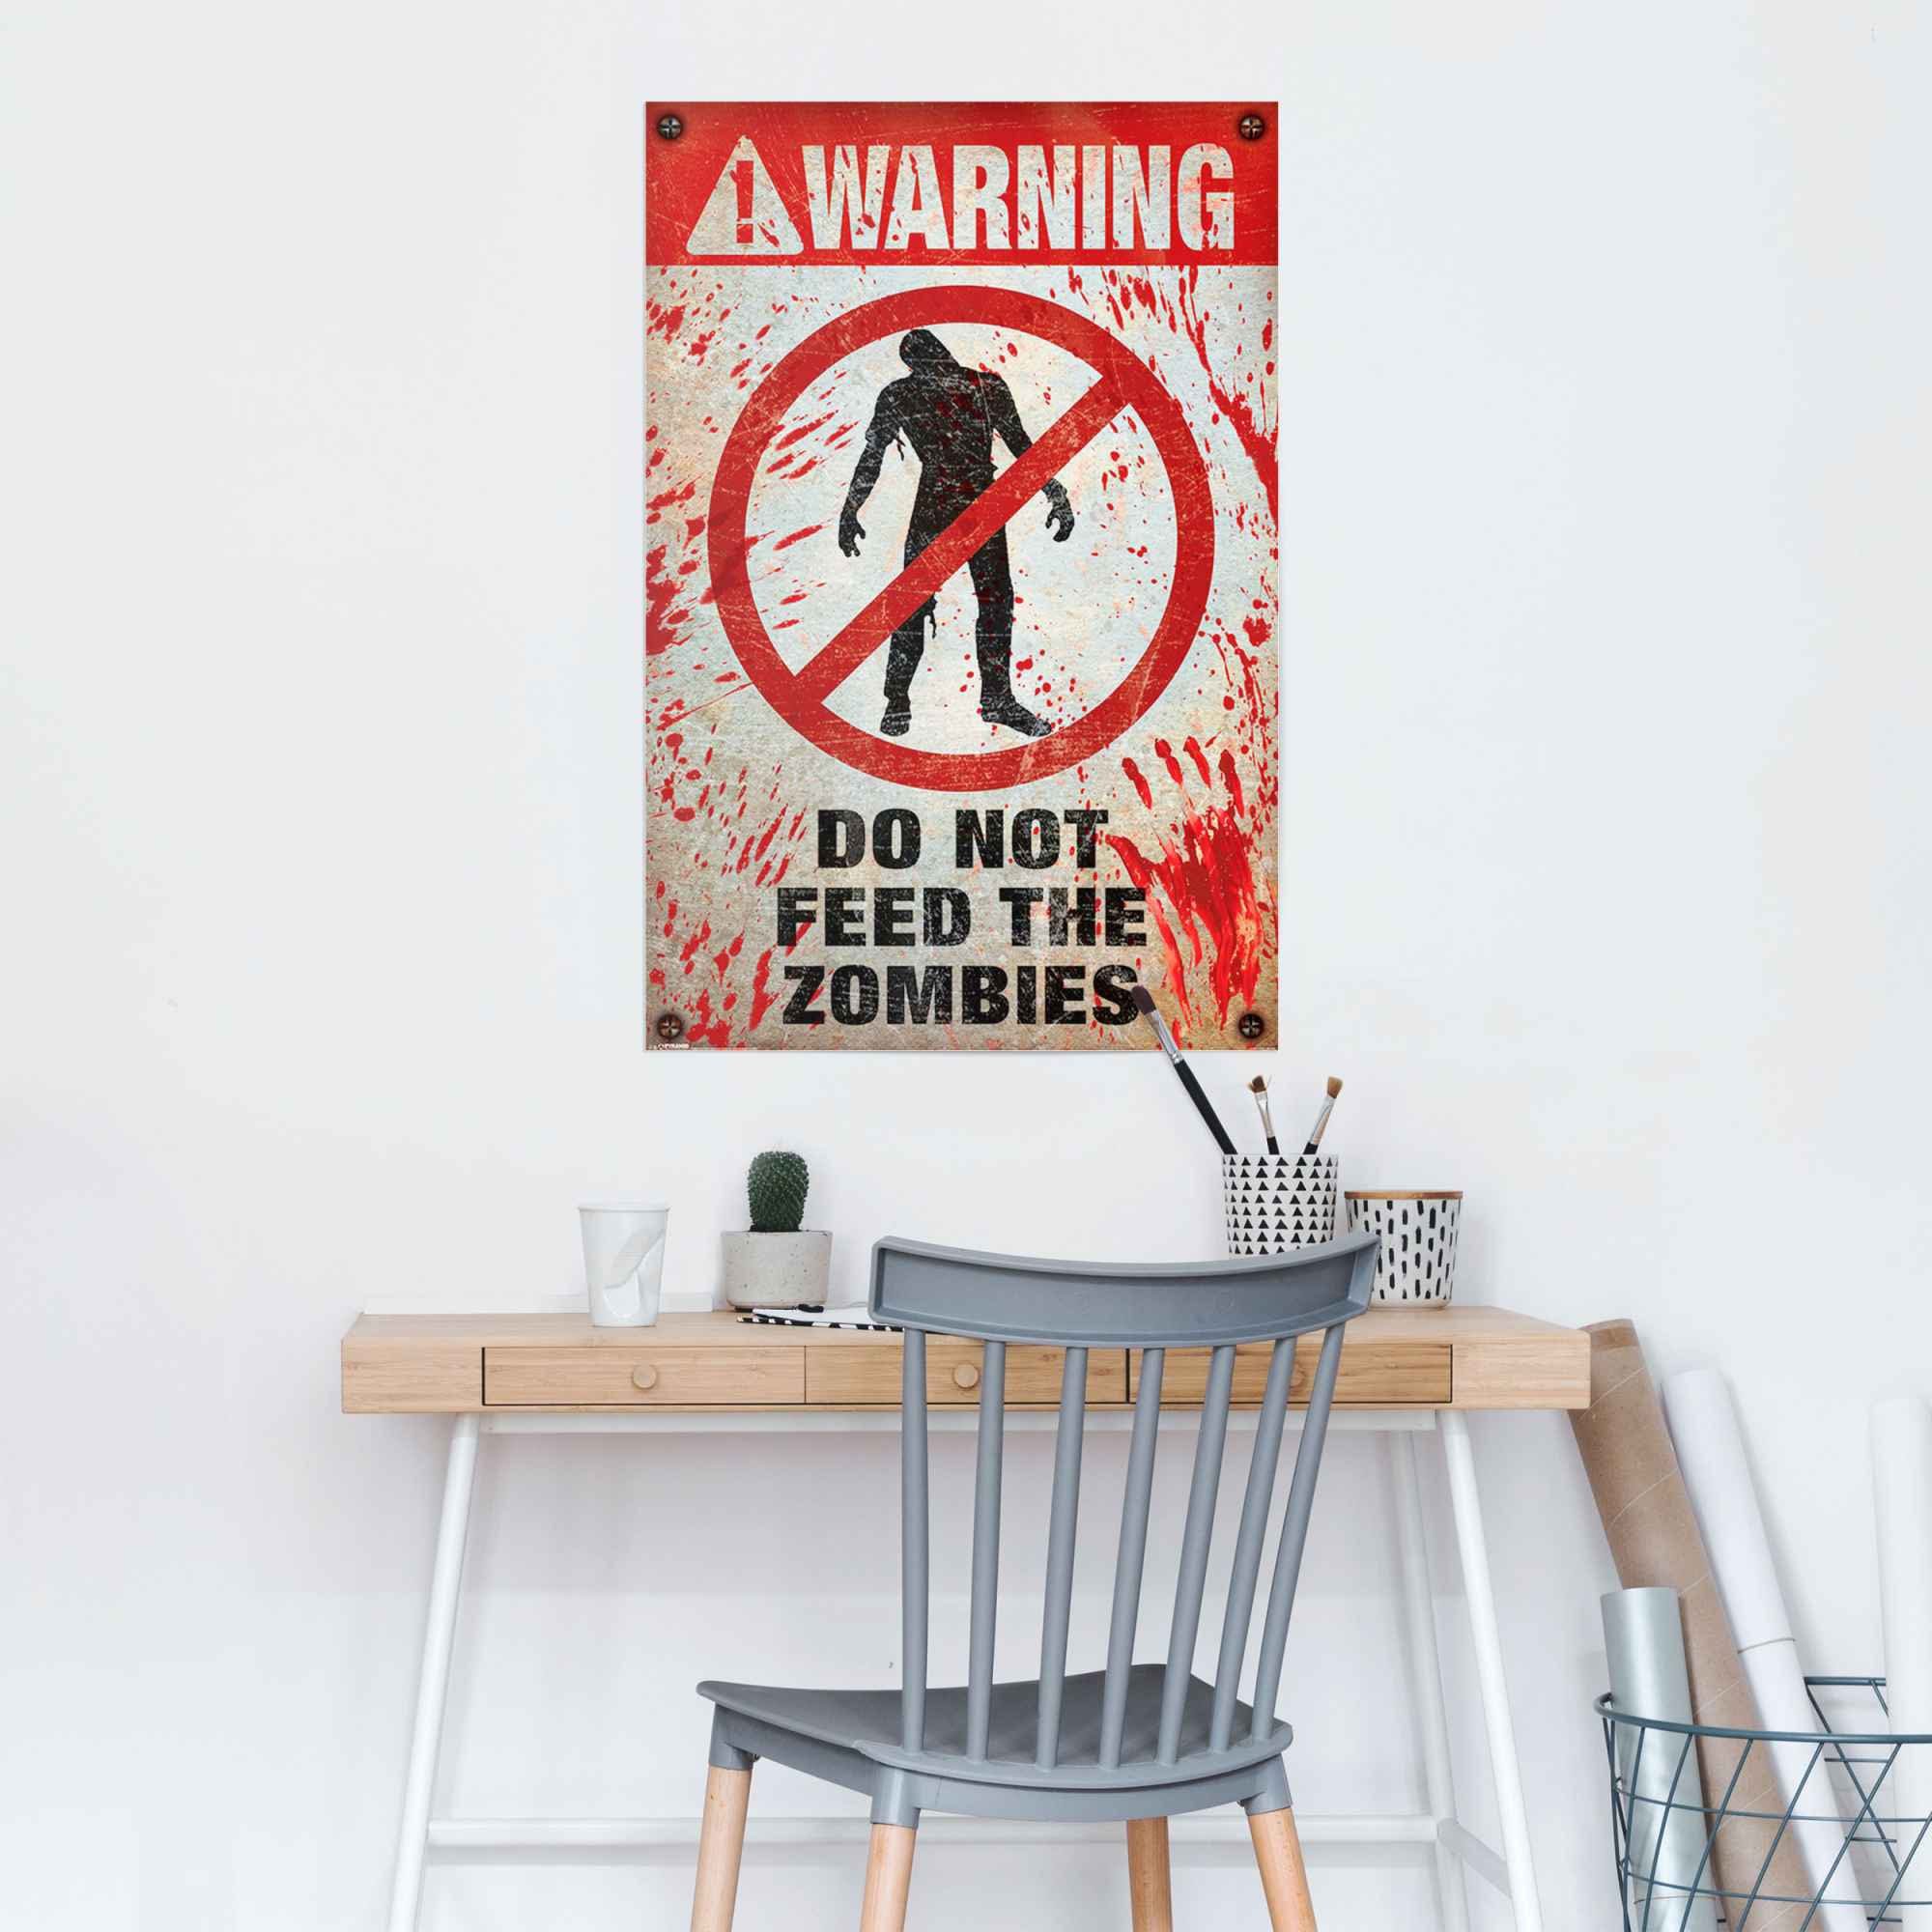 Reinders! Poster Warning! Do Not The St) Feed Zombies, (1